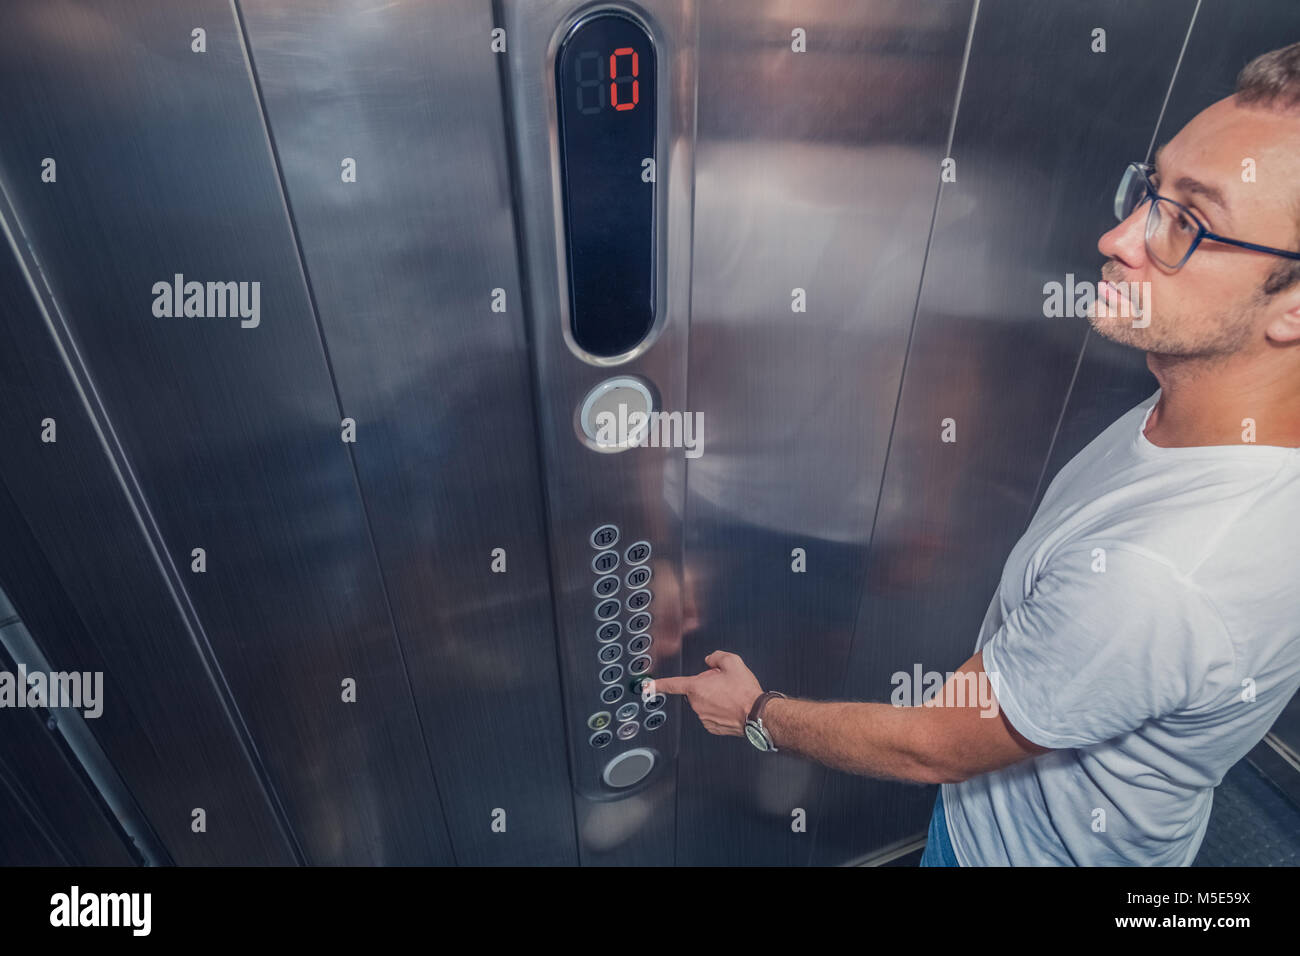 Young man in elevator pressing the zero floor button. Iron made interior. Stock Photo